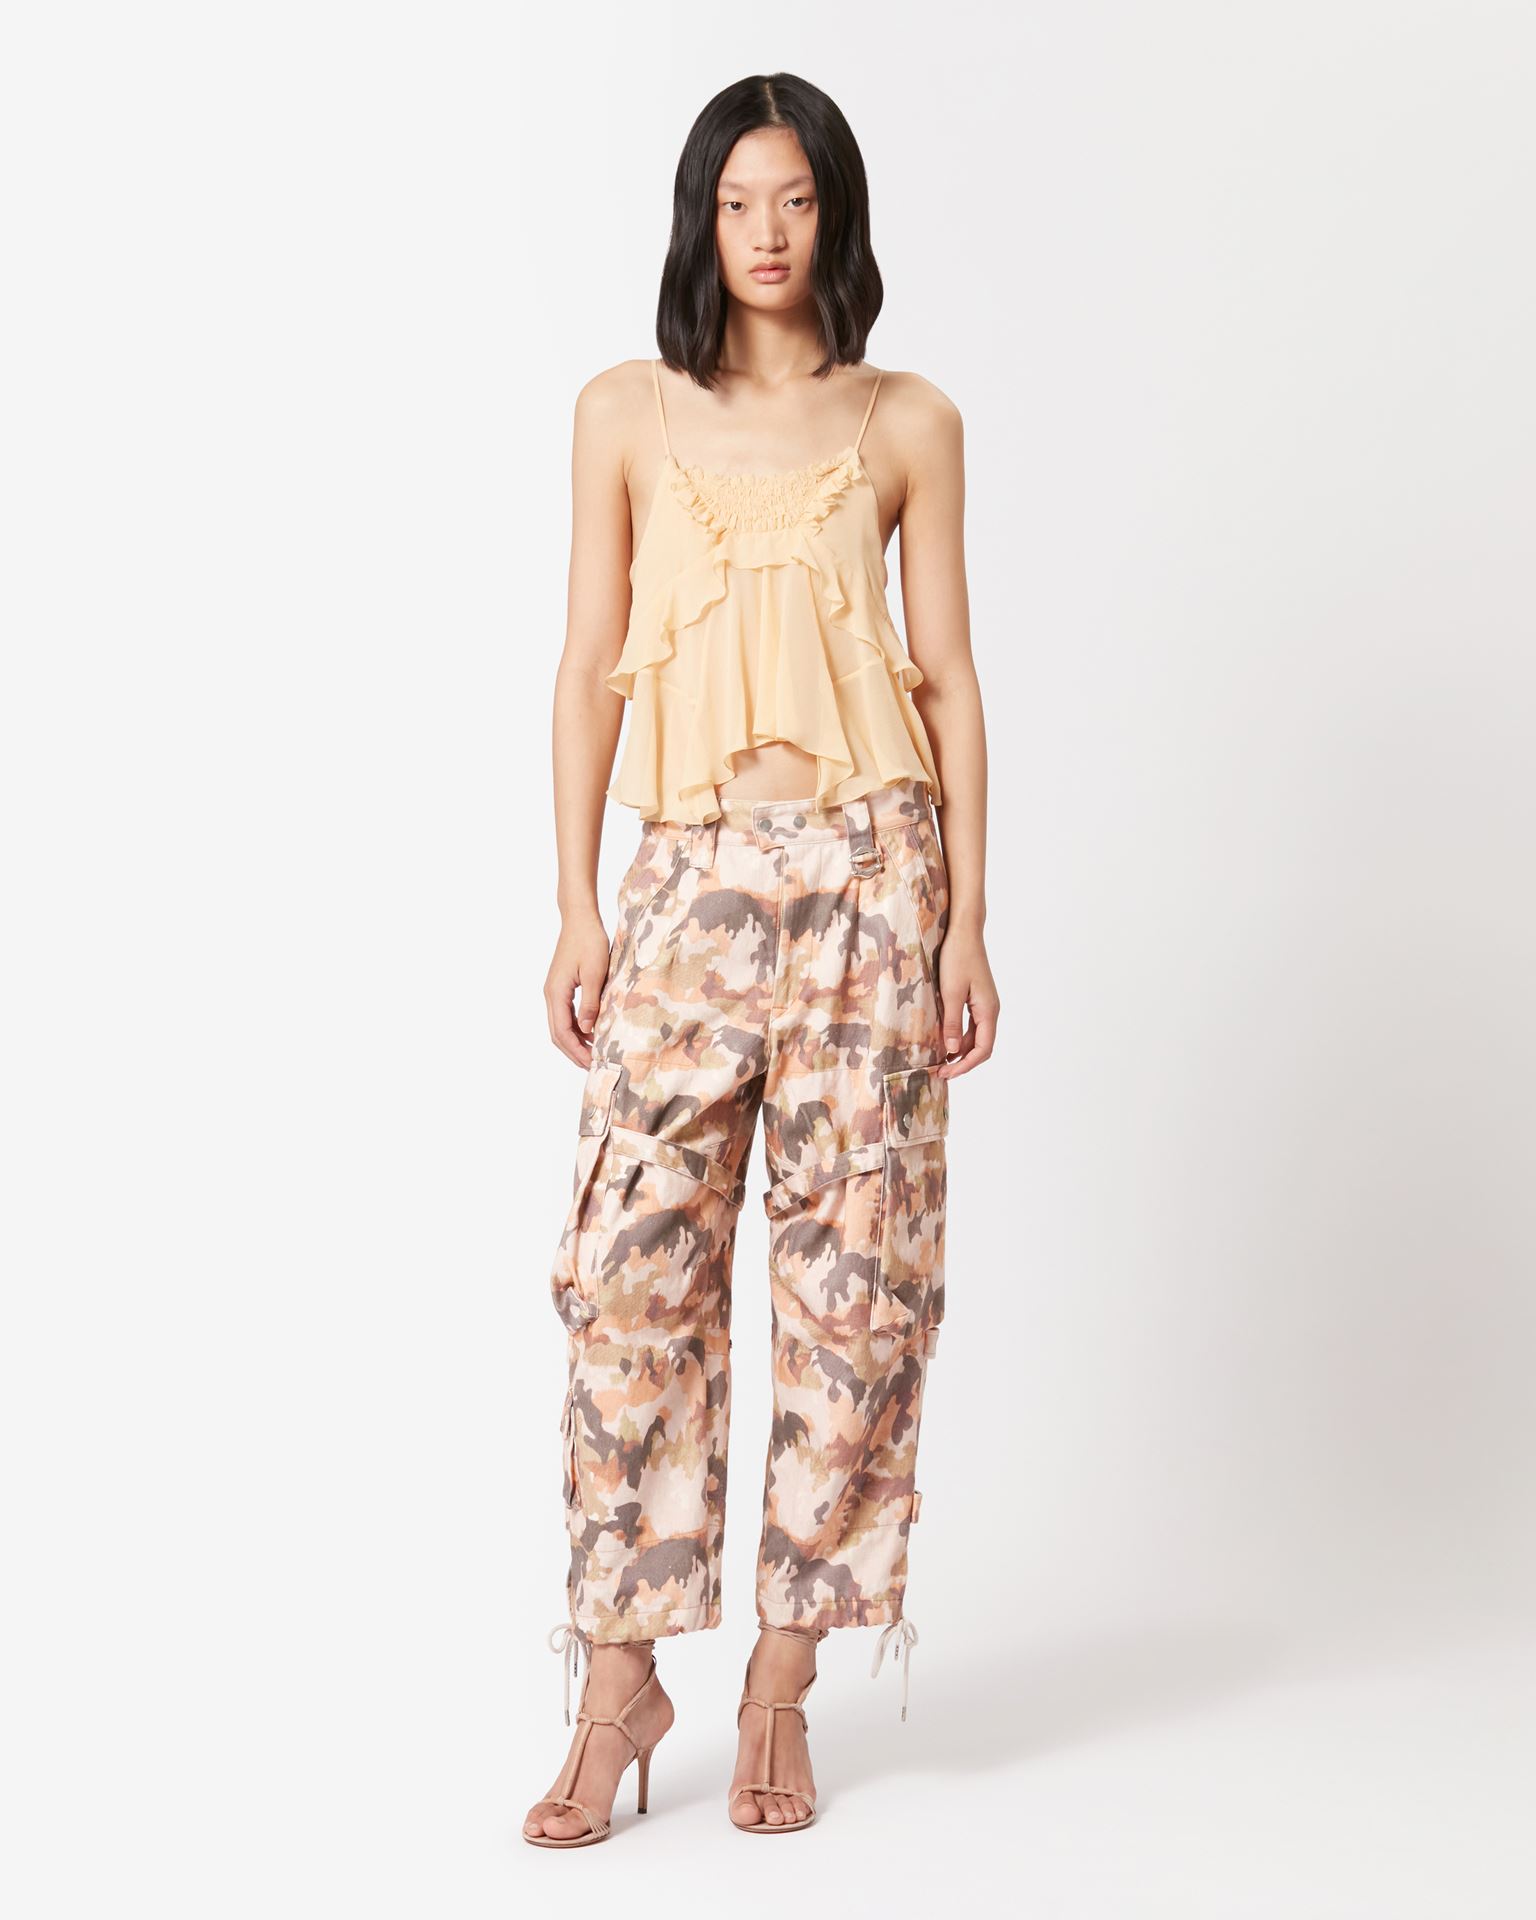 Isabel Marant, Elore Printed Cotton Trousers - Women - Brown